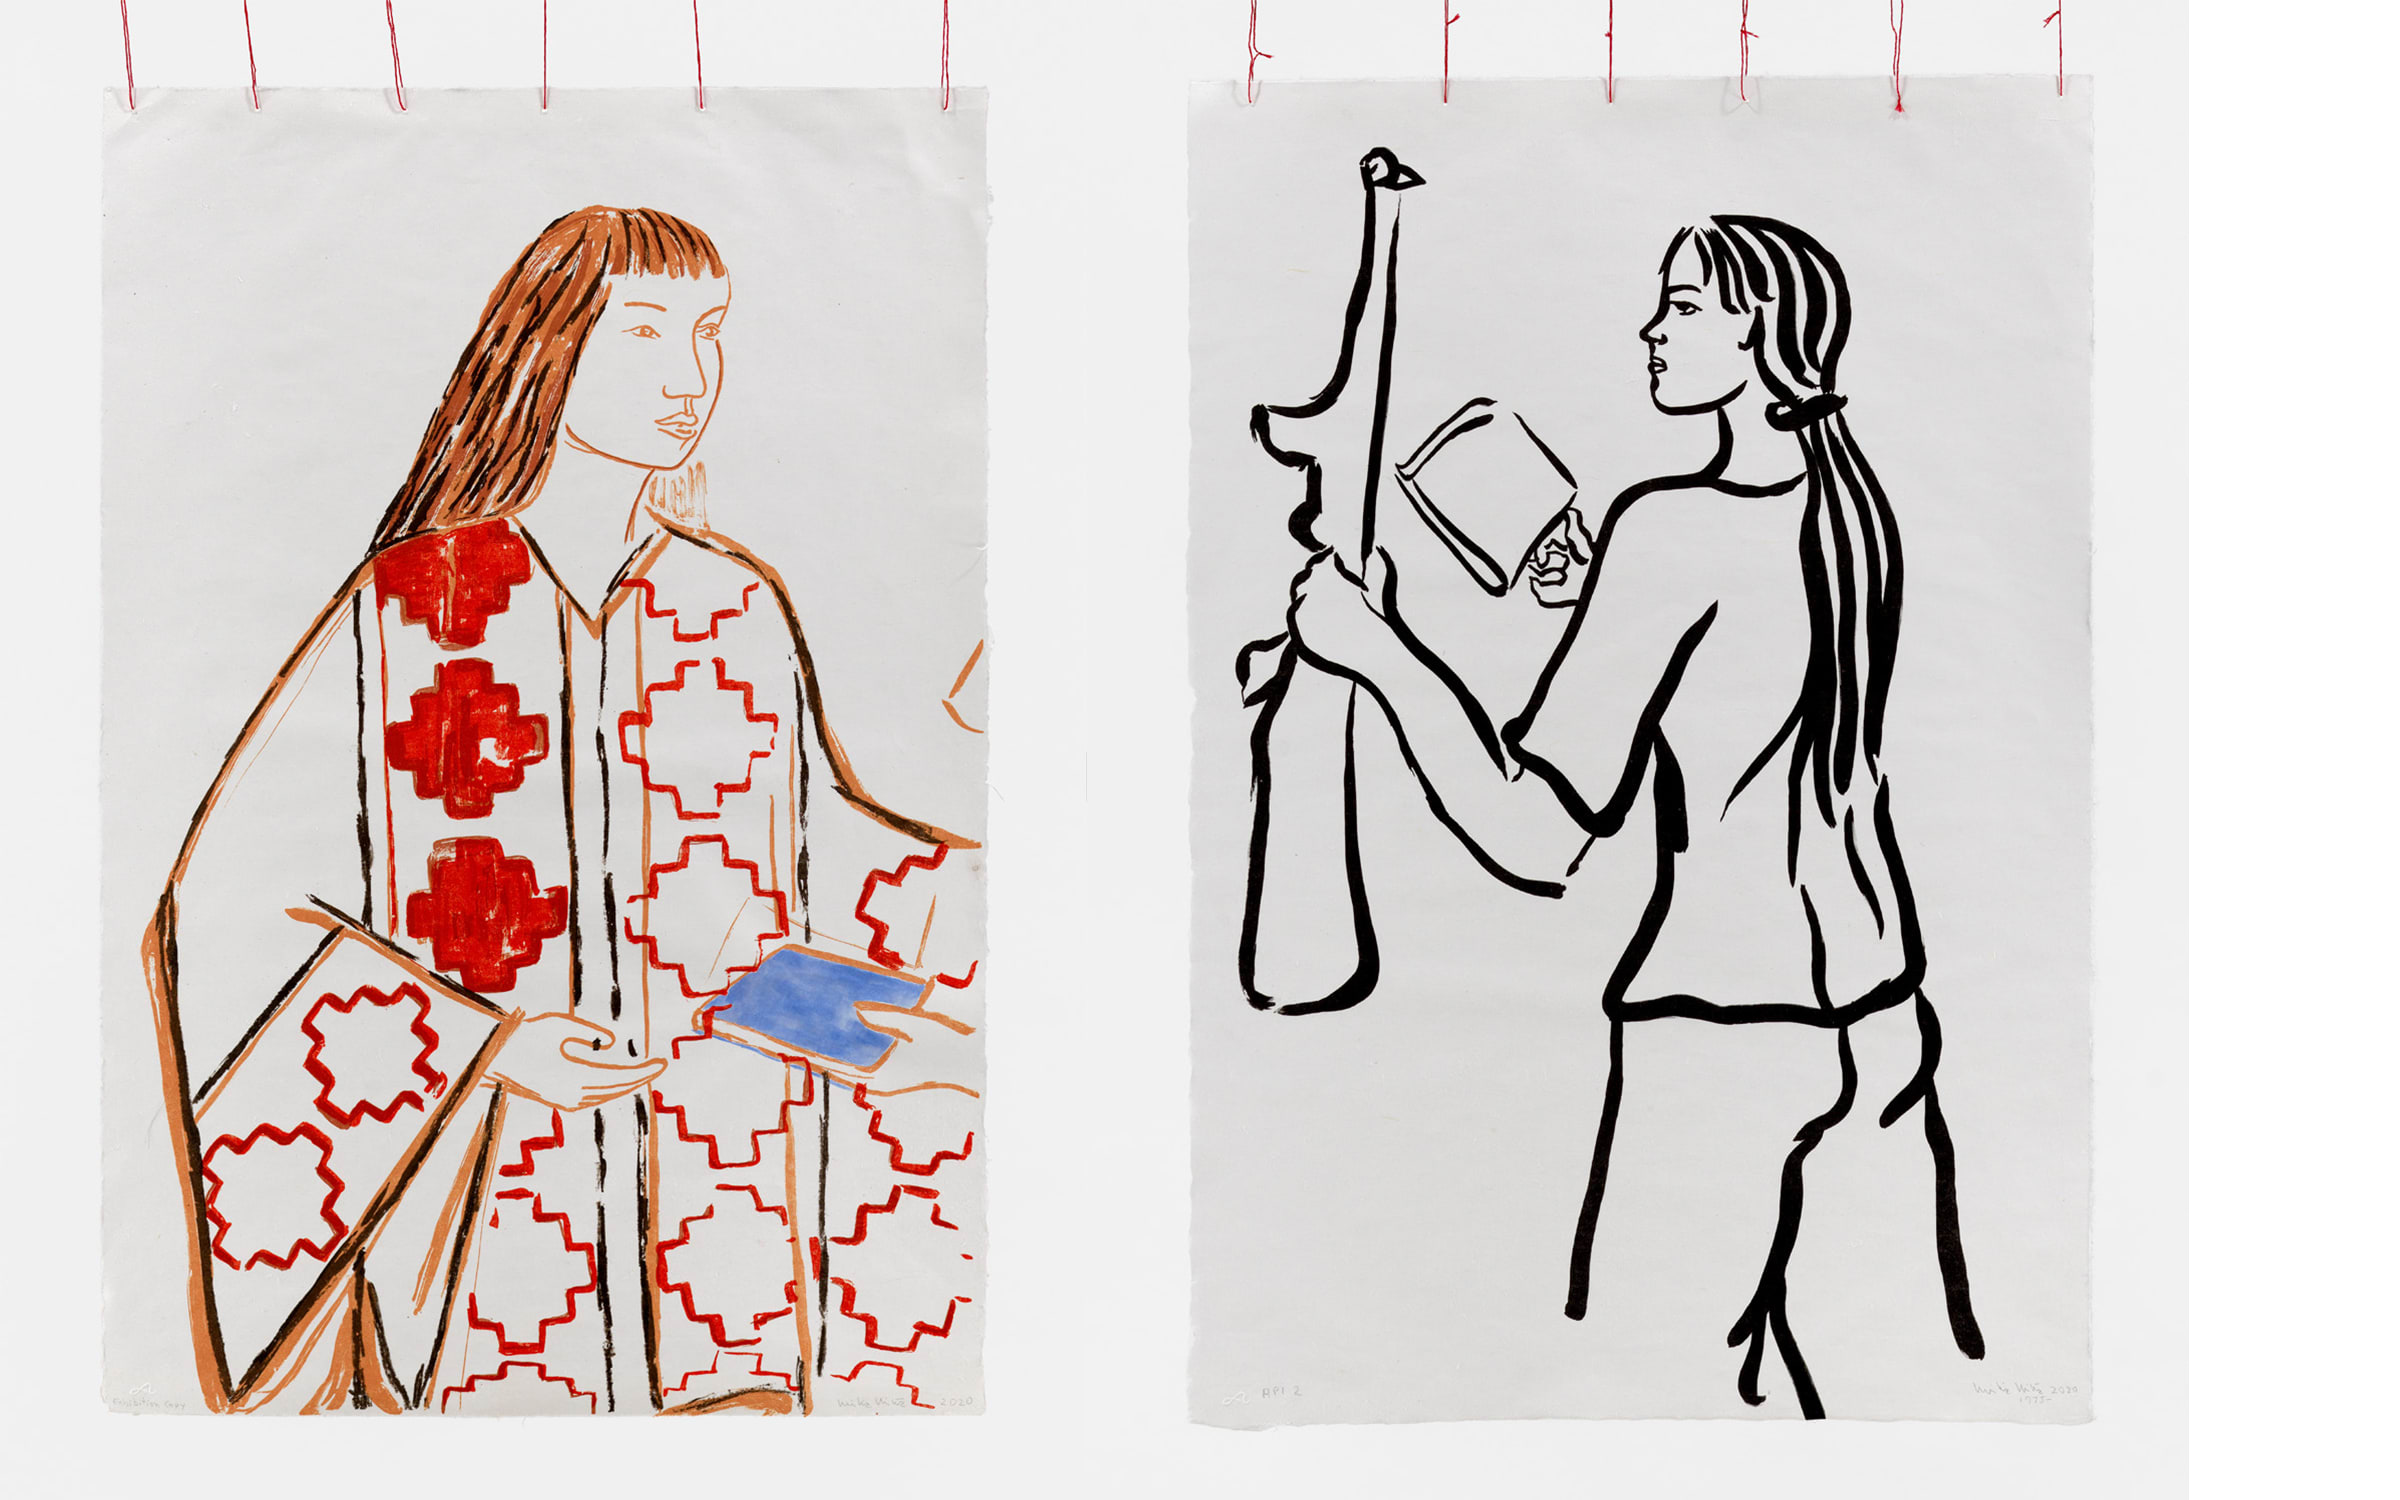 Left: Cecilia Vicuña, Niña Mapuche, 1975-2021. Right: Girl with Book and Gun, 1975-2021. Courtesy of the artist and Lehmann Maupin, New York City, Hong Kong, Seoul, and London.